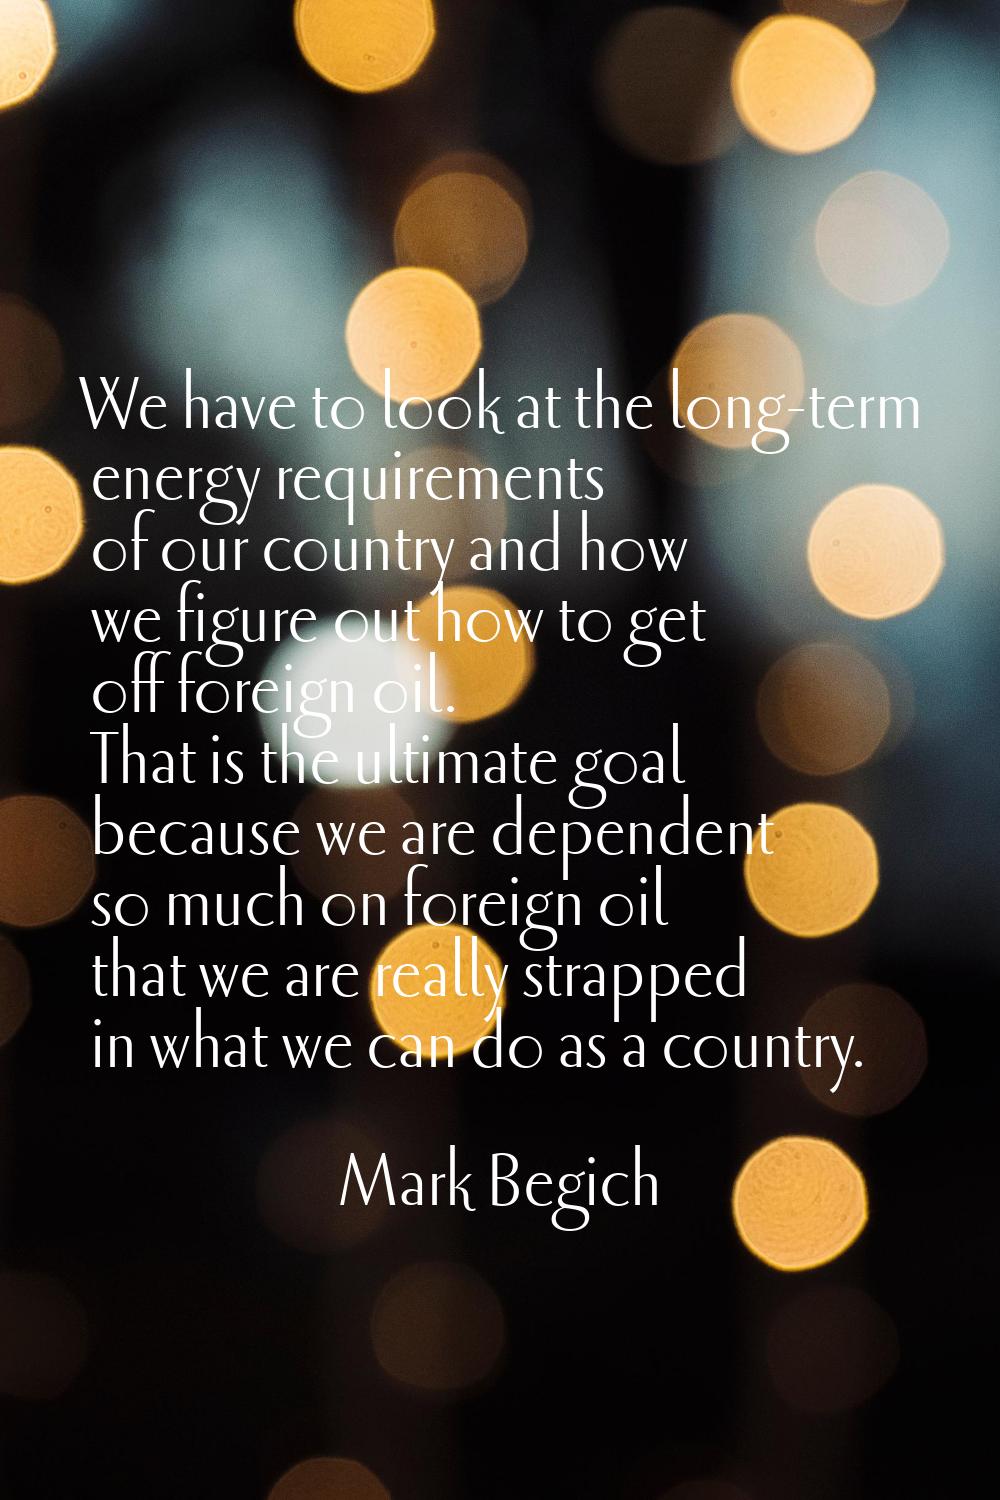 We have to look at the long-term energy requirements of our country and how we figure out how to ge